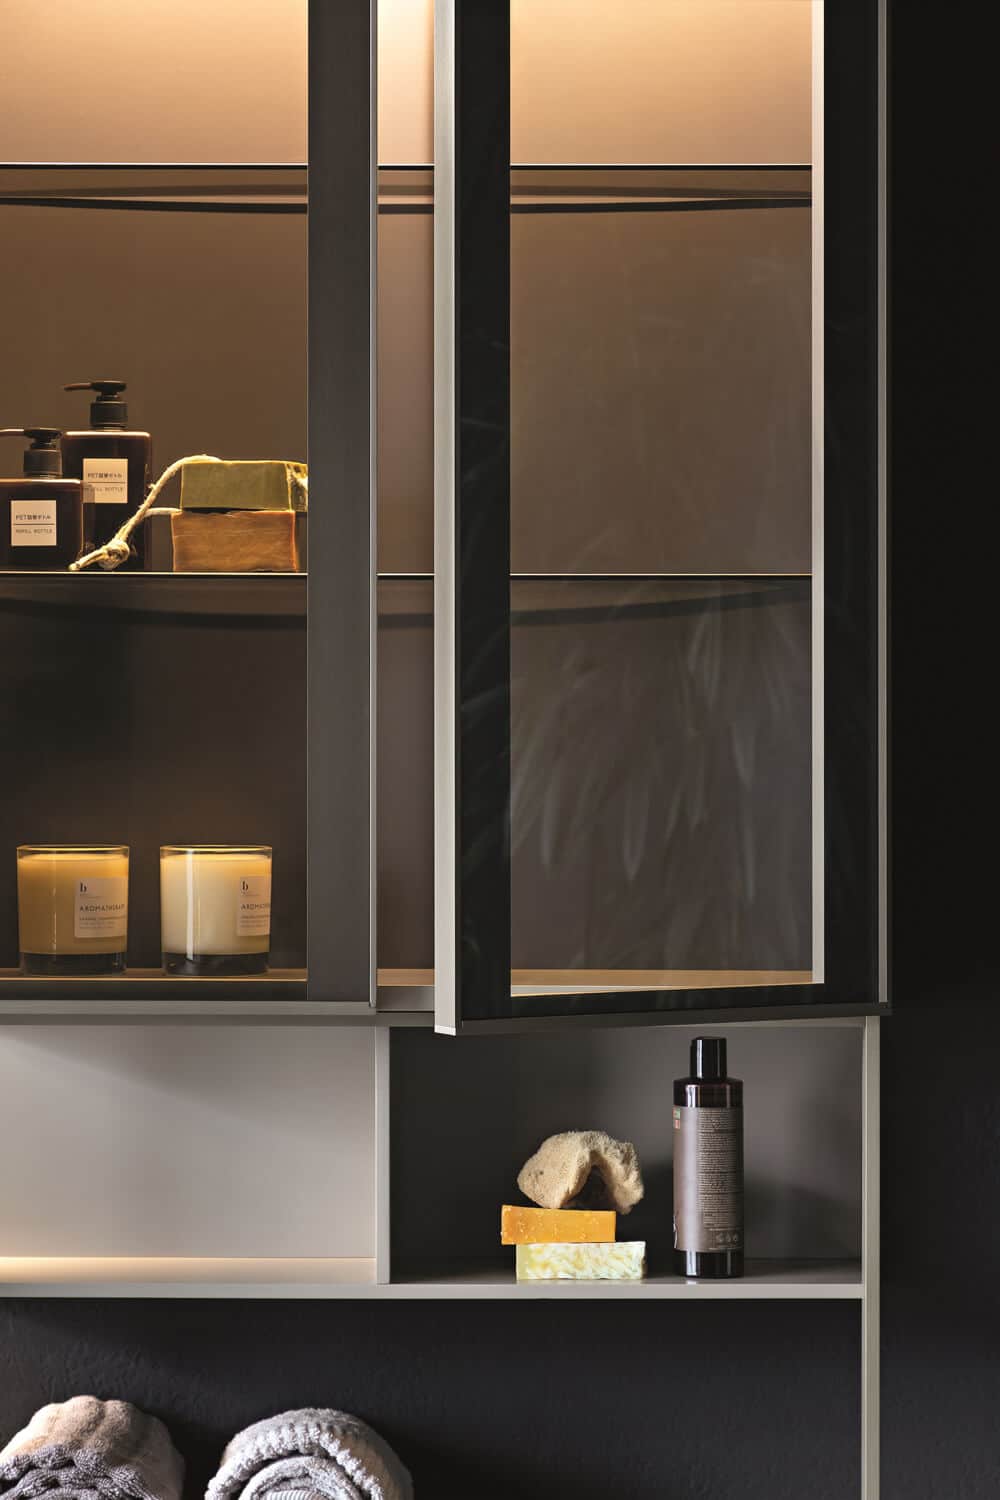 Internal lights and doors in burnished glass contribute an elegant ambiance to the bathroom.